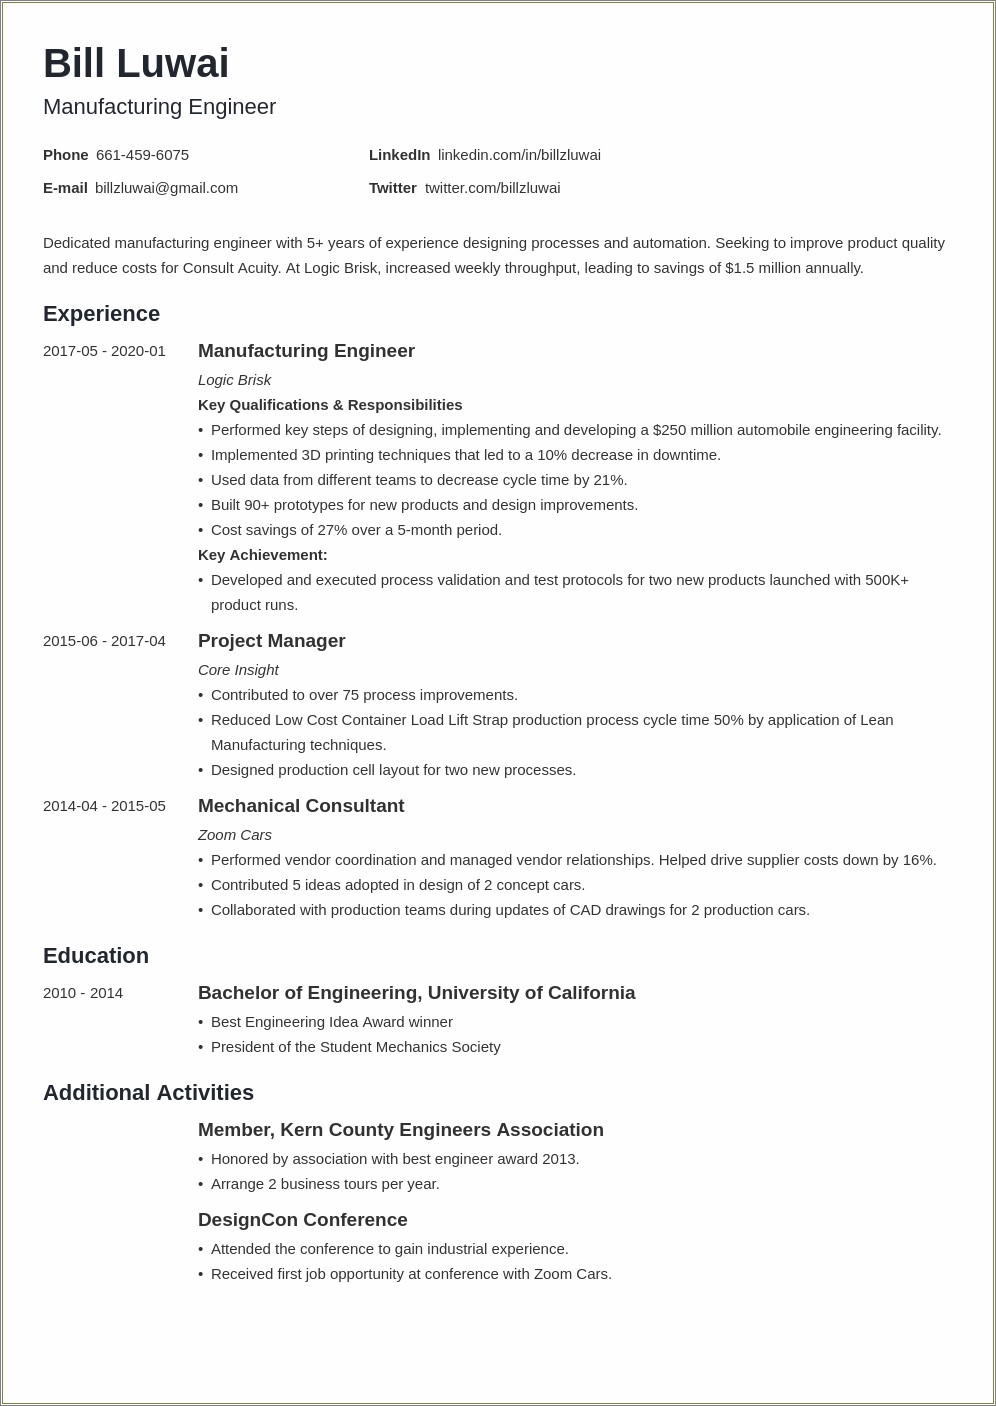 Sample Resume Objectives For Entry Level Manufacturing